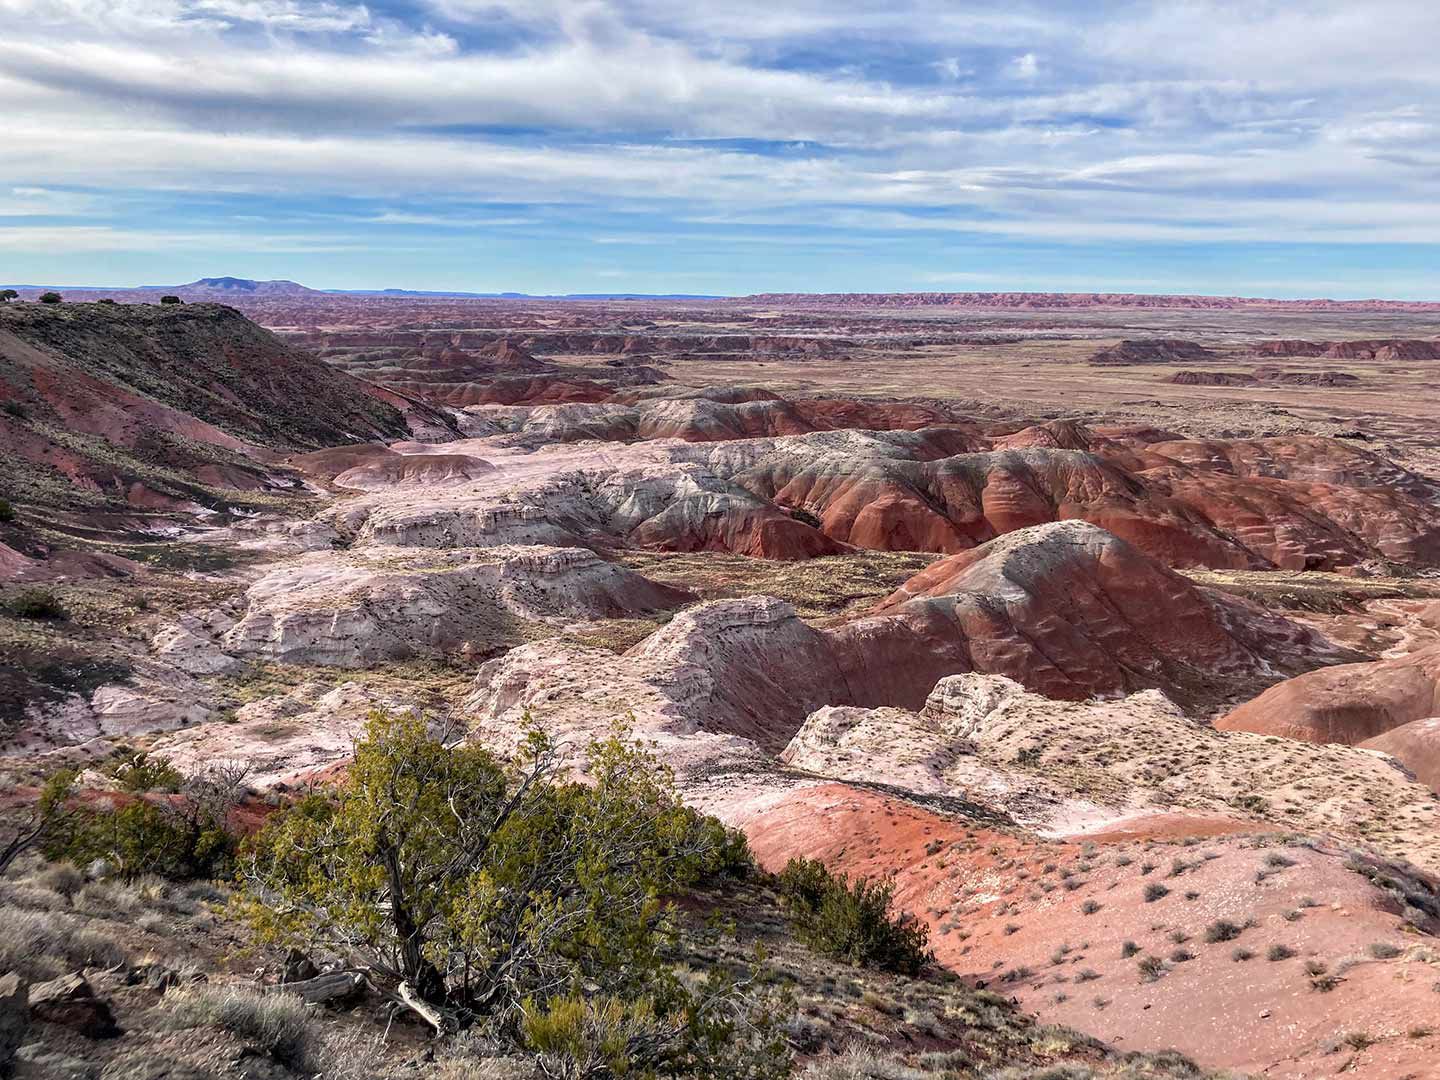 Tawa Point in the Painted Desert in Petrified Forest National Park.